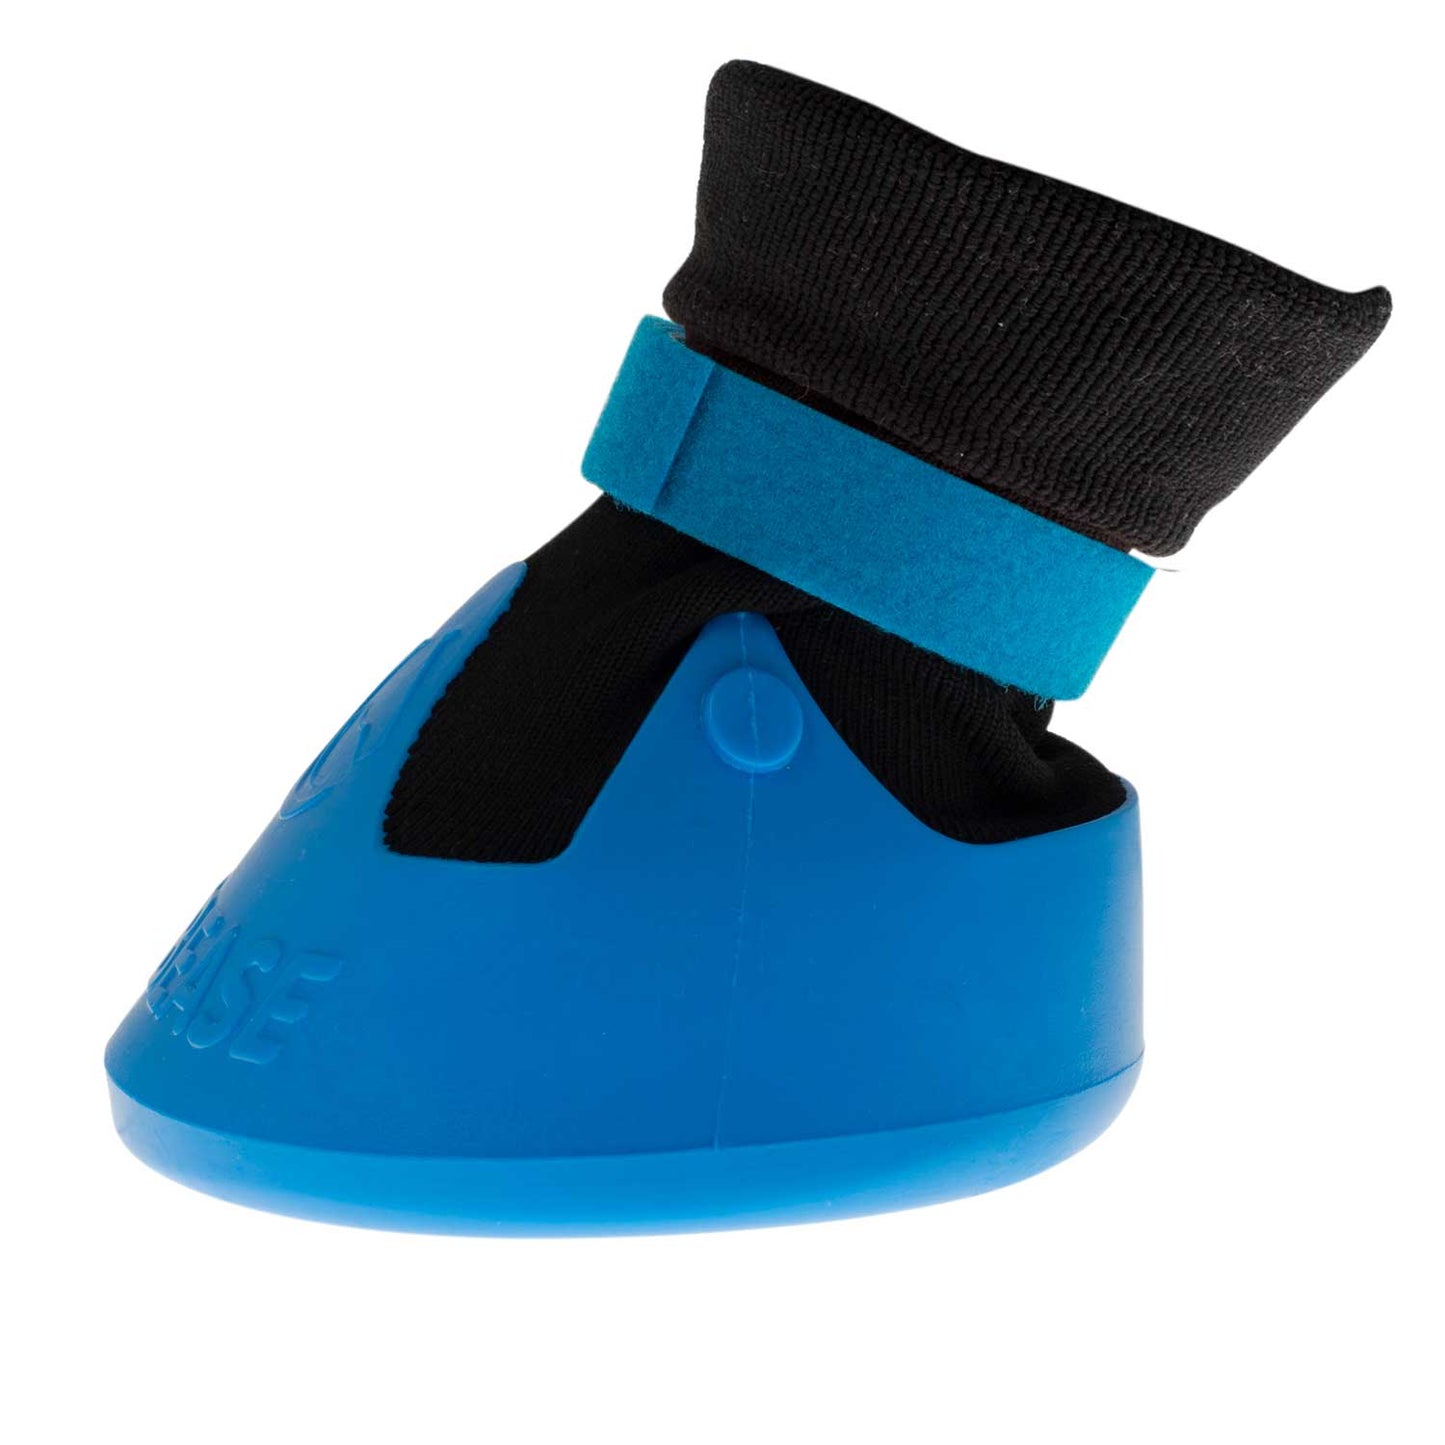 Blue medical shoe cover with black elastic band on white background.